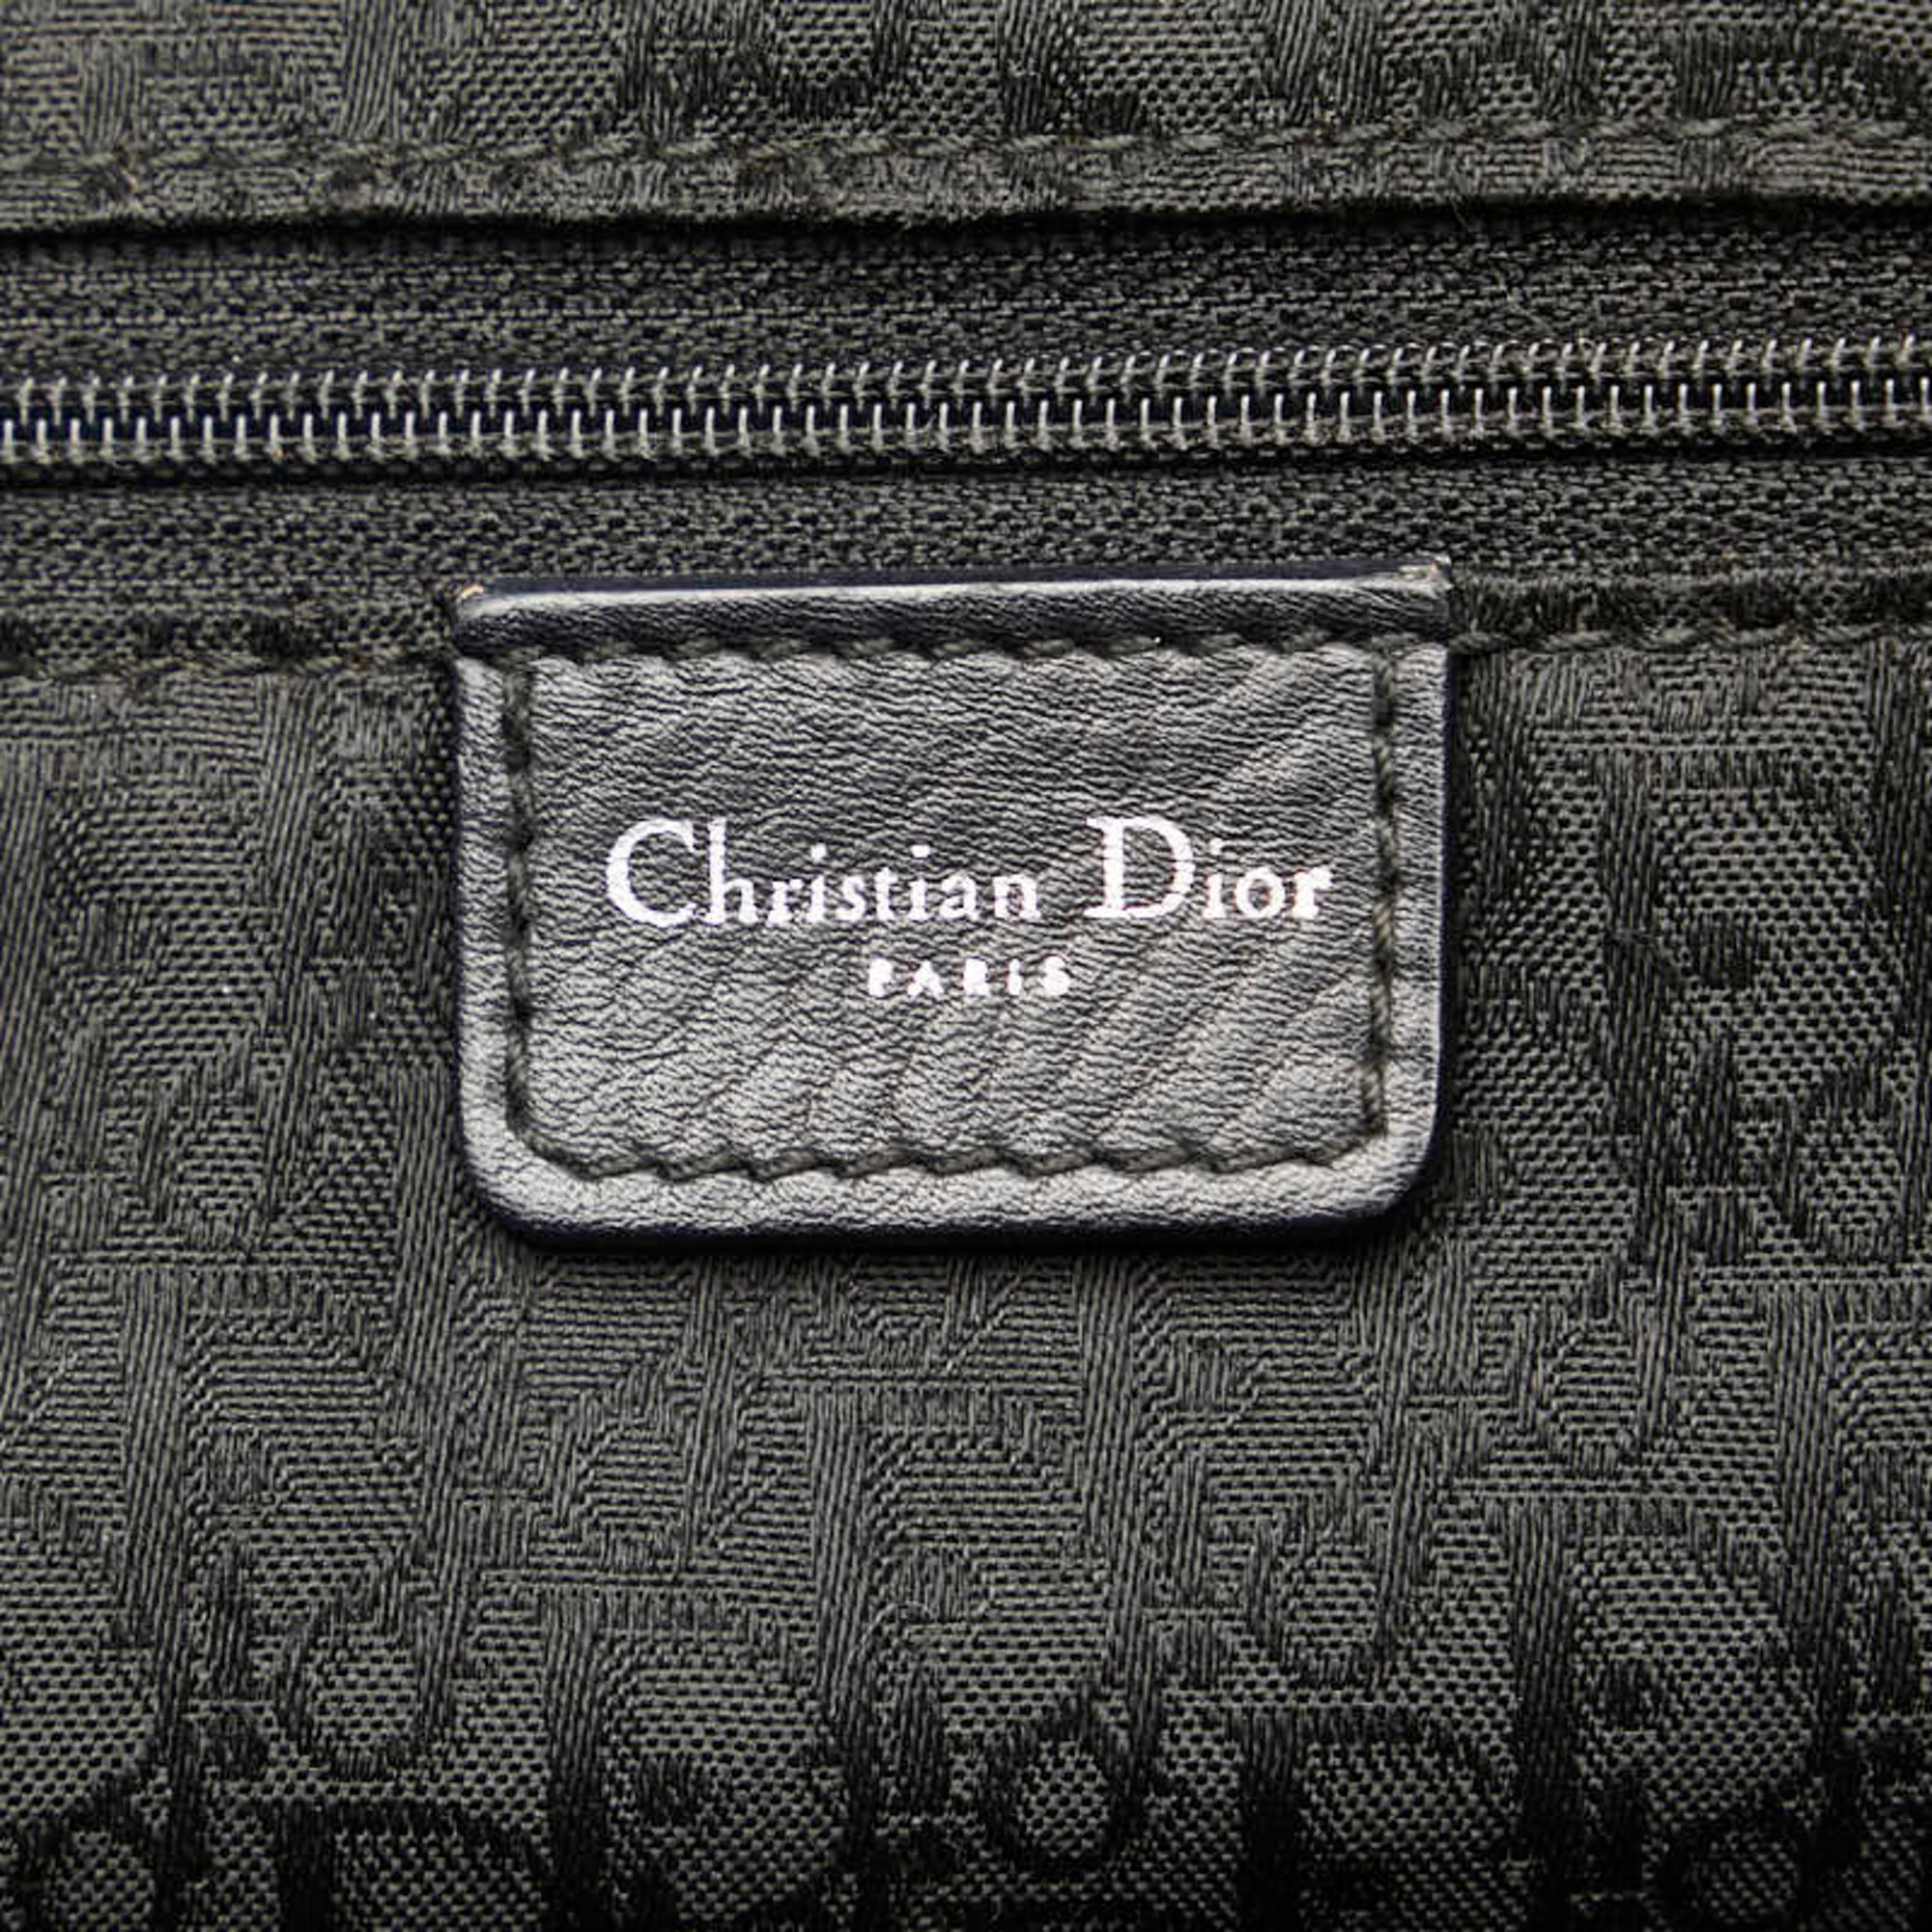 Christian Dior Dior Cannage Tote Bag Black Silver Leather Women's